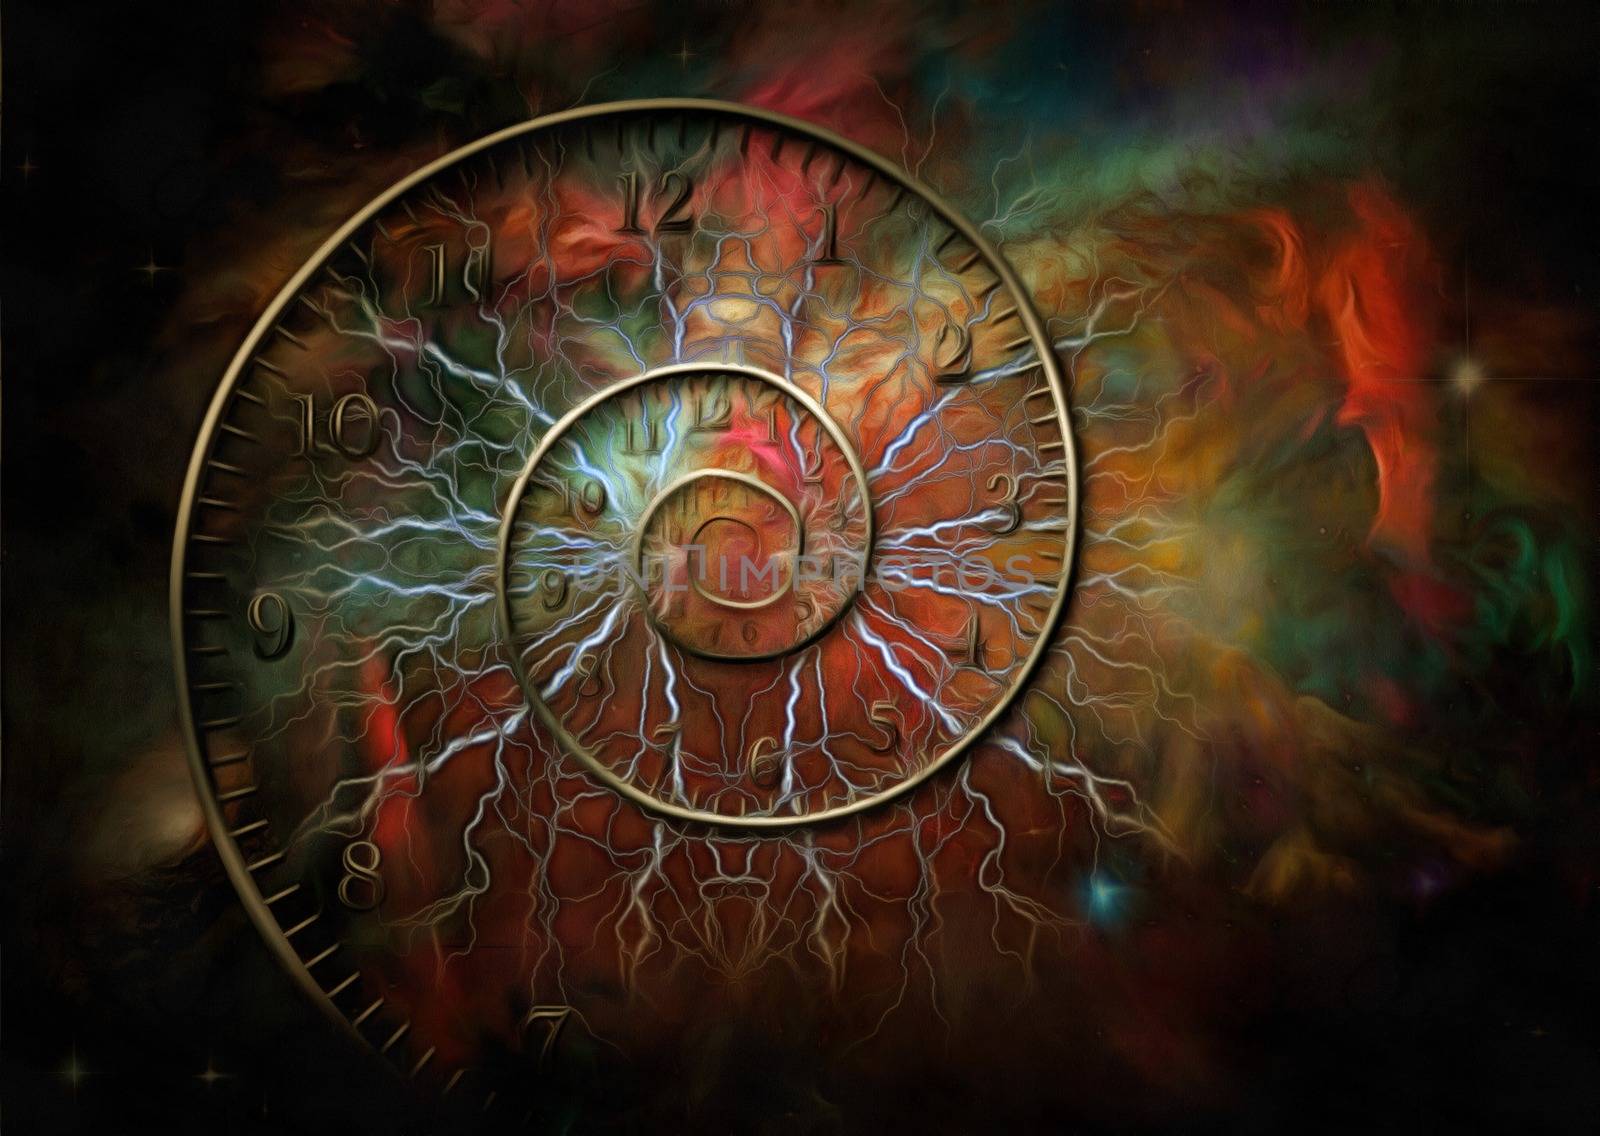 Spiral of time by applesstock